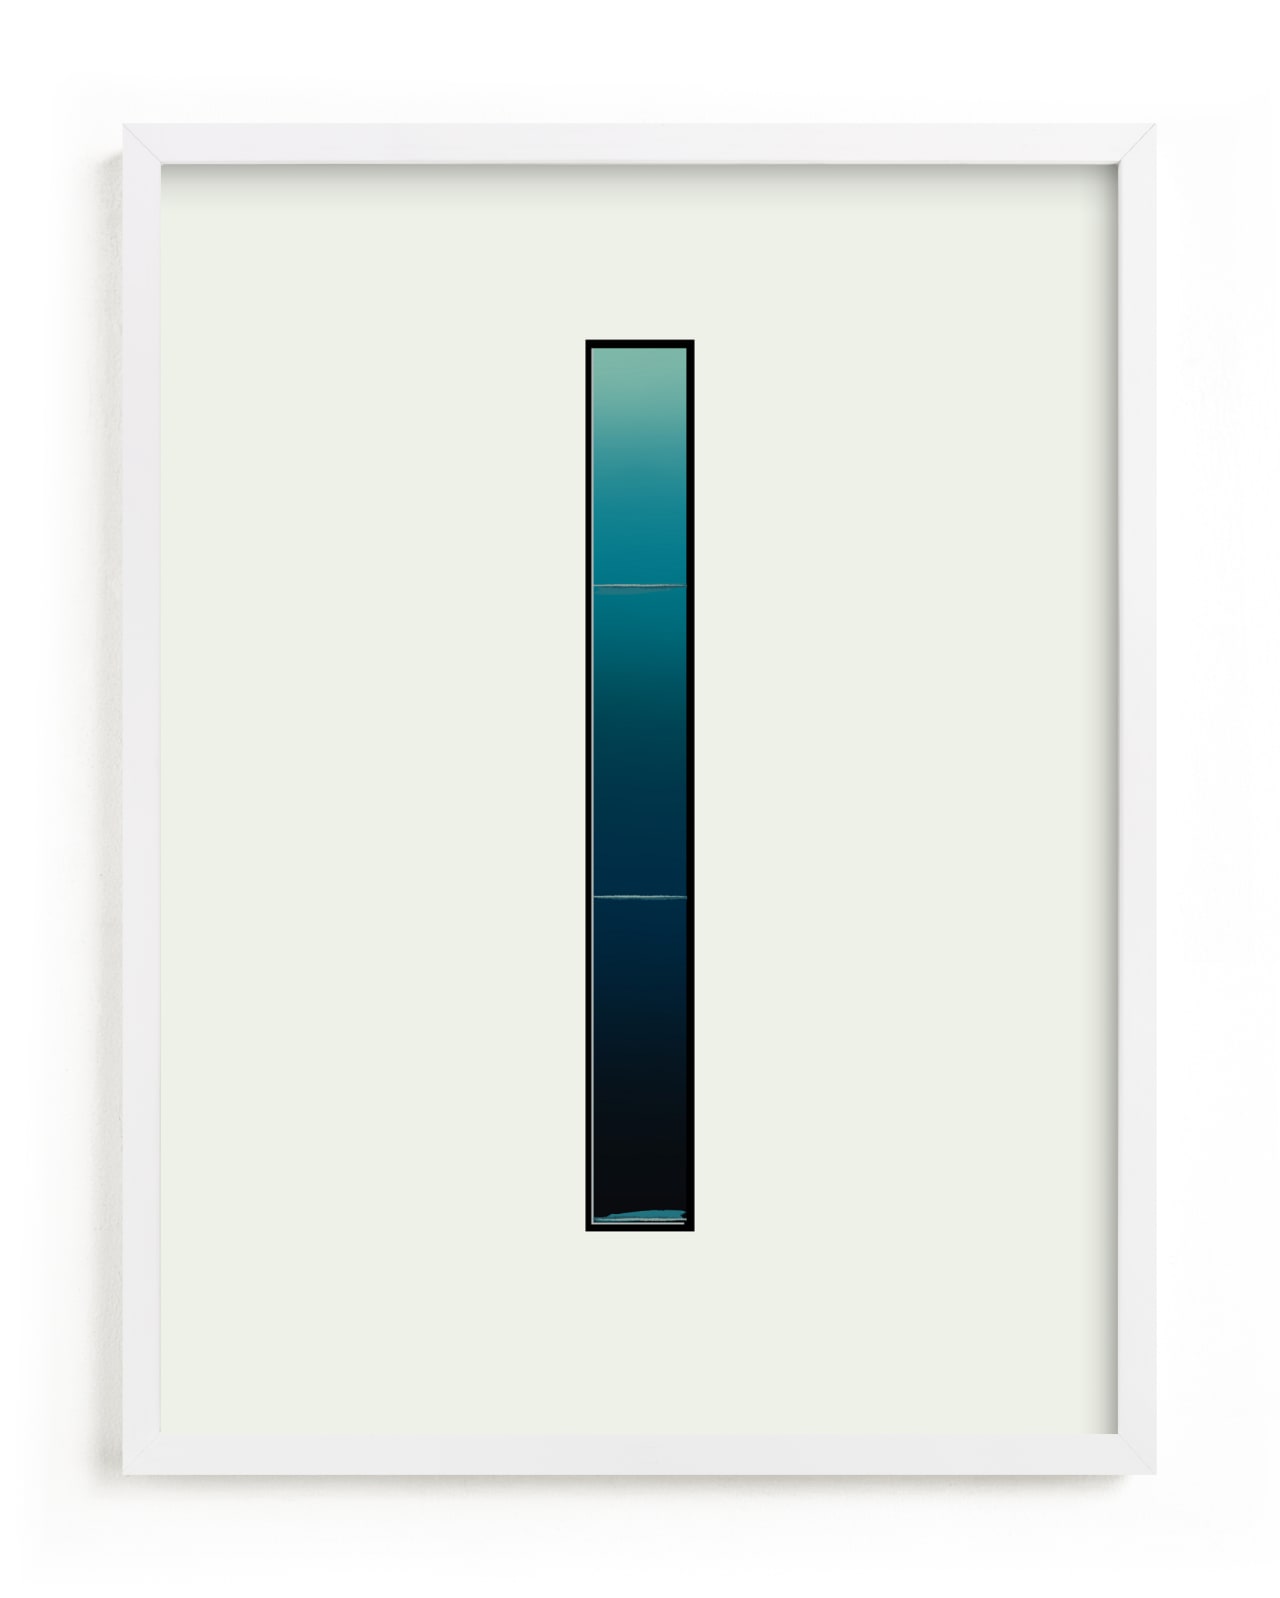 This is a blue art by Curtis Newkirk called Building Window.